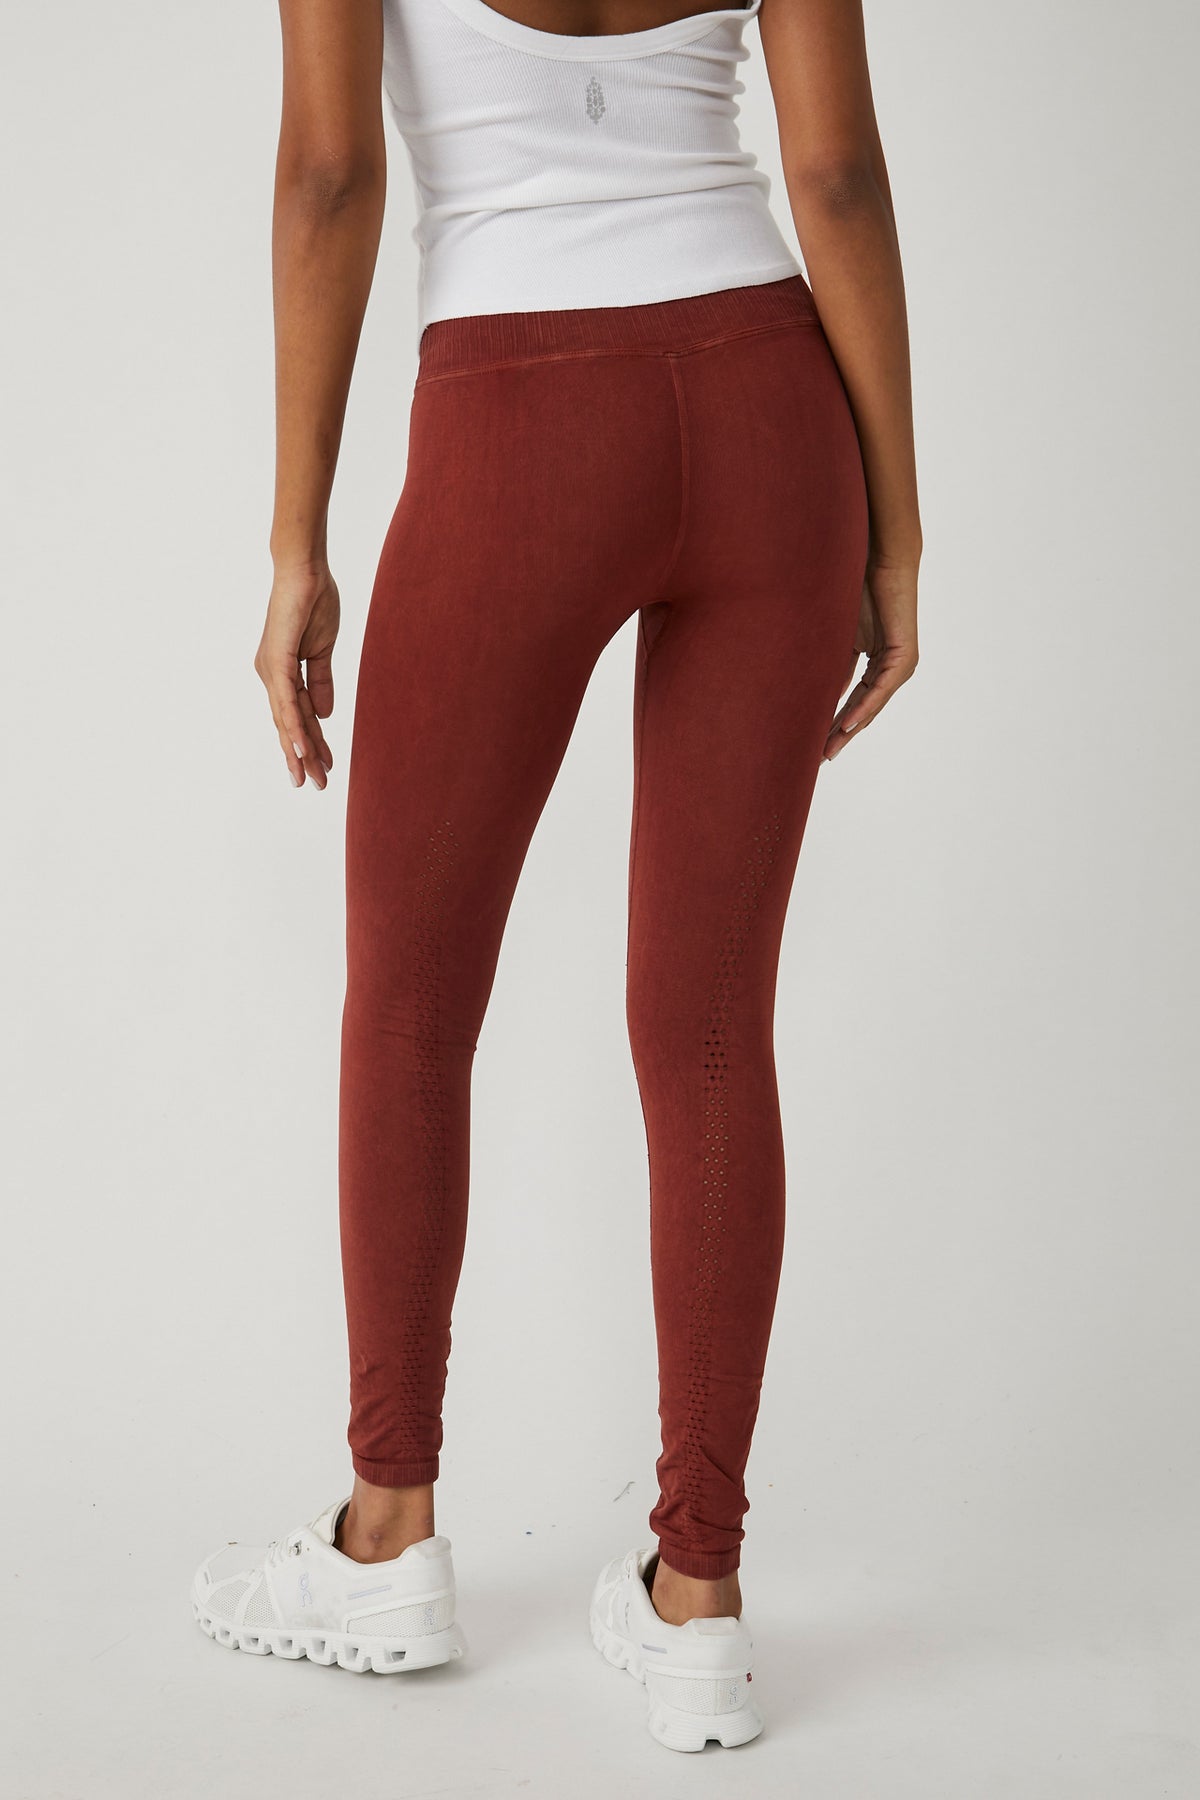 FP Movement by Free People, Pants & Jumpsuits, Fp Movement Free People  Good Karma Flare Leggings Red Nwot Hatch Ml